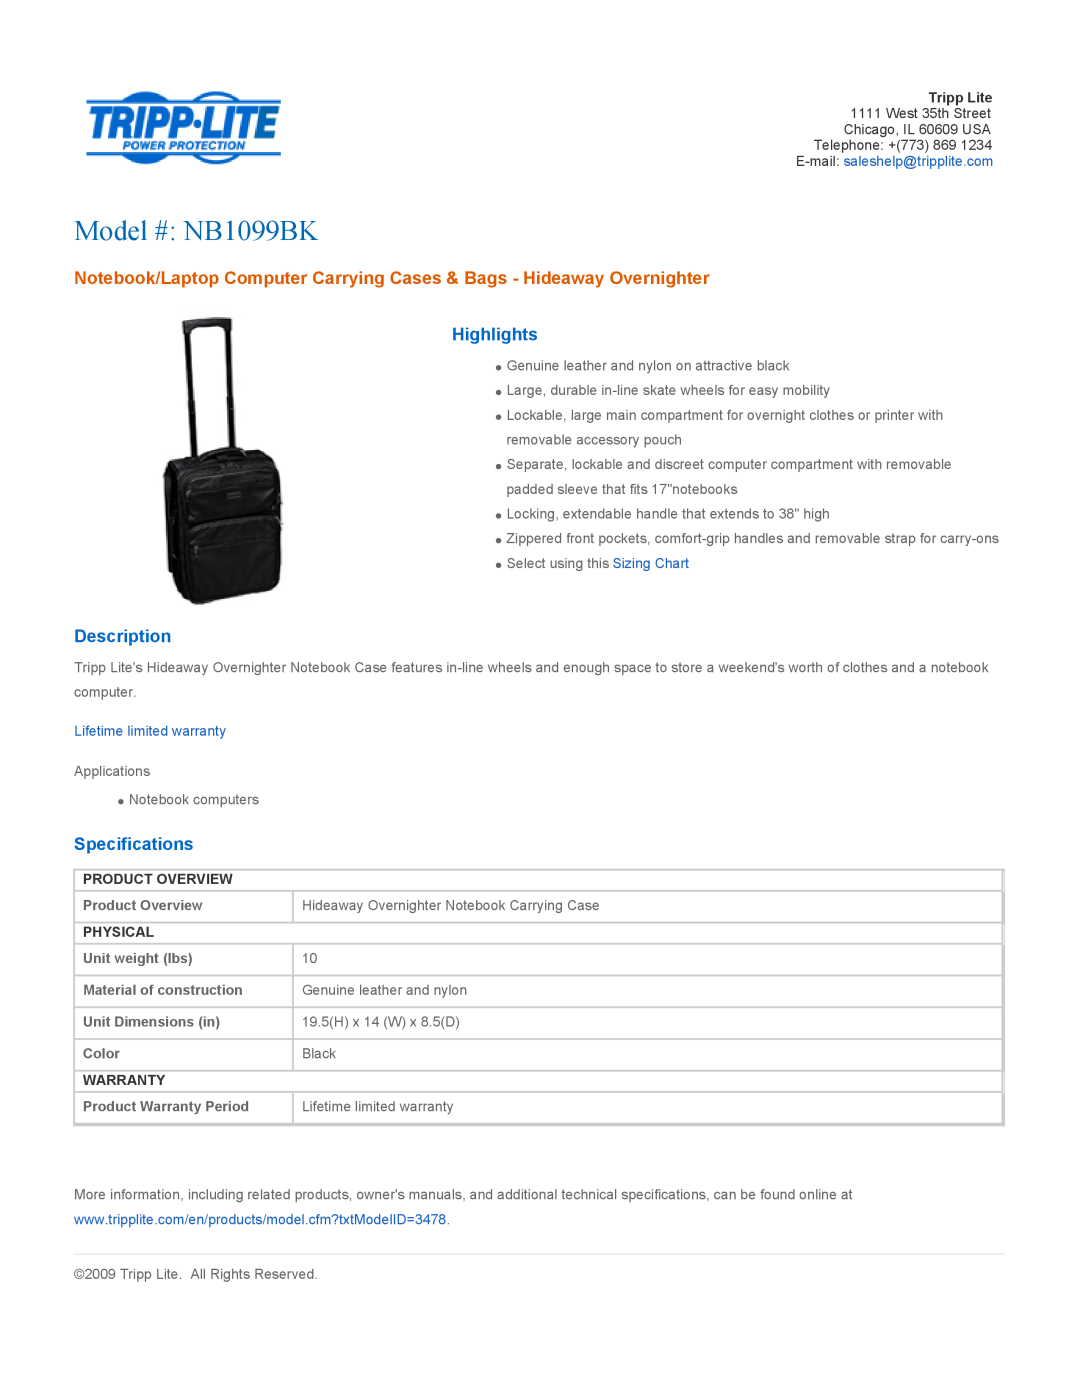 Tripp Lite specifications Model # NB1099BK, Notebook/Laptop Computer Carrying Cases & Bags - Hideaway Overnighter 